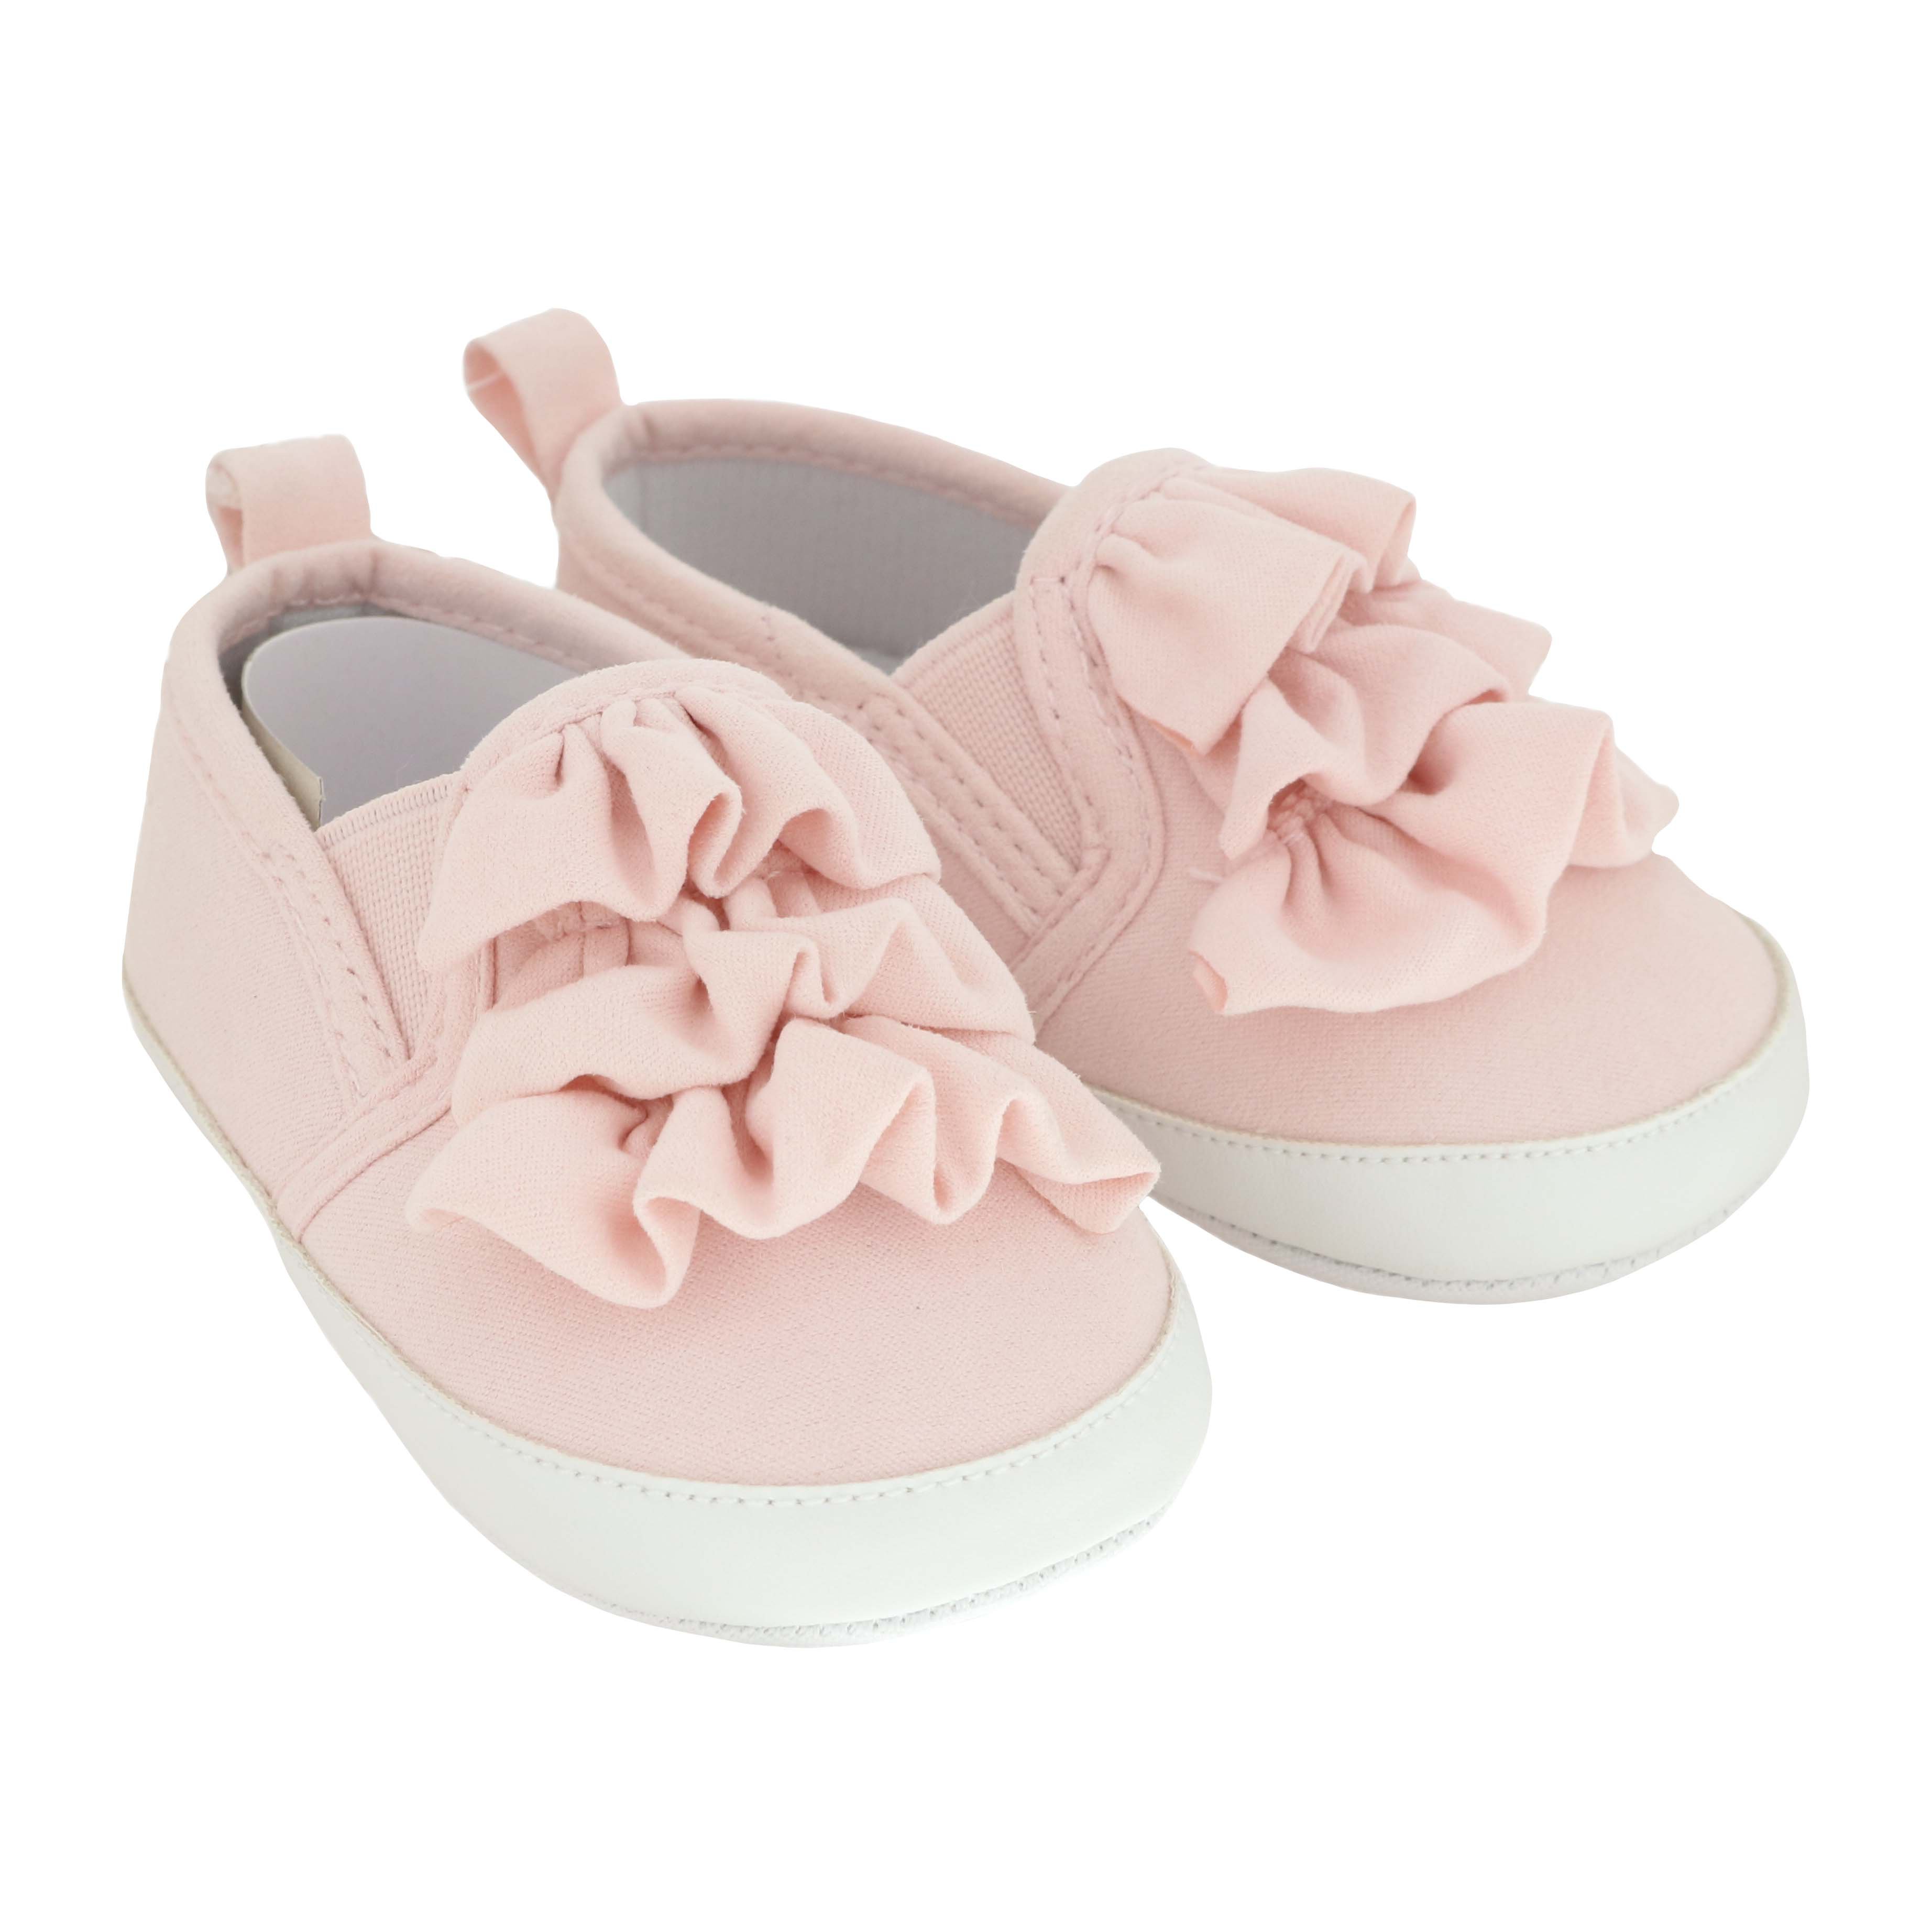 size three baby shoes